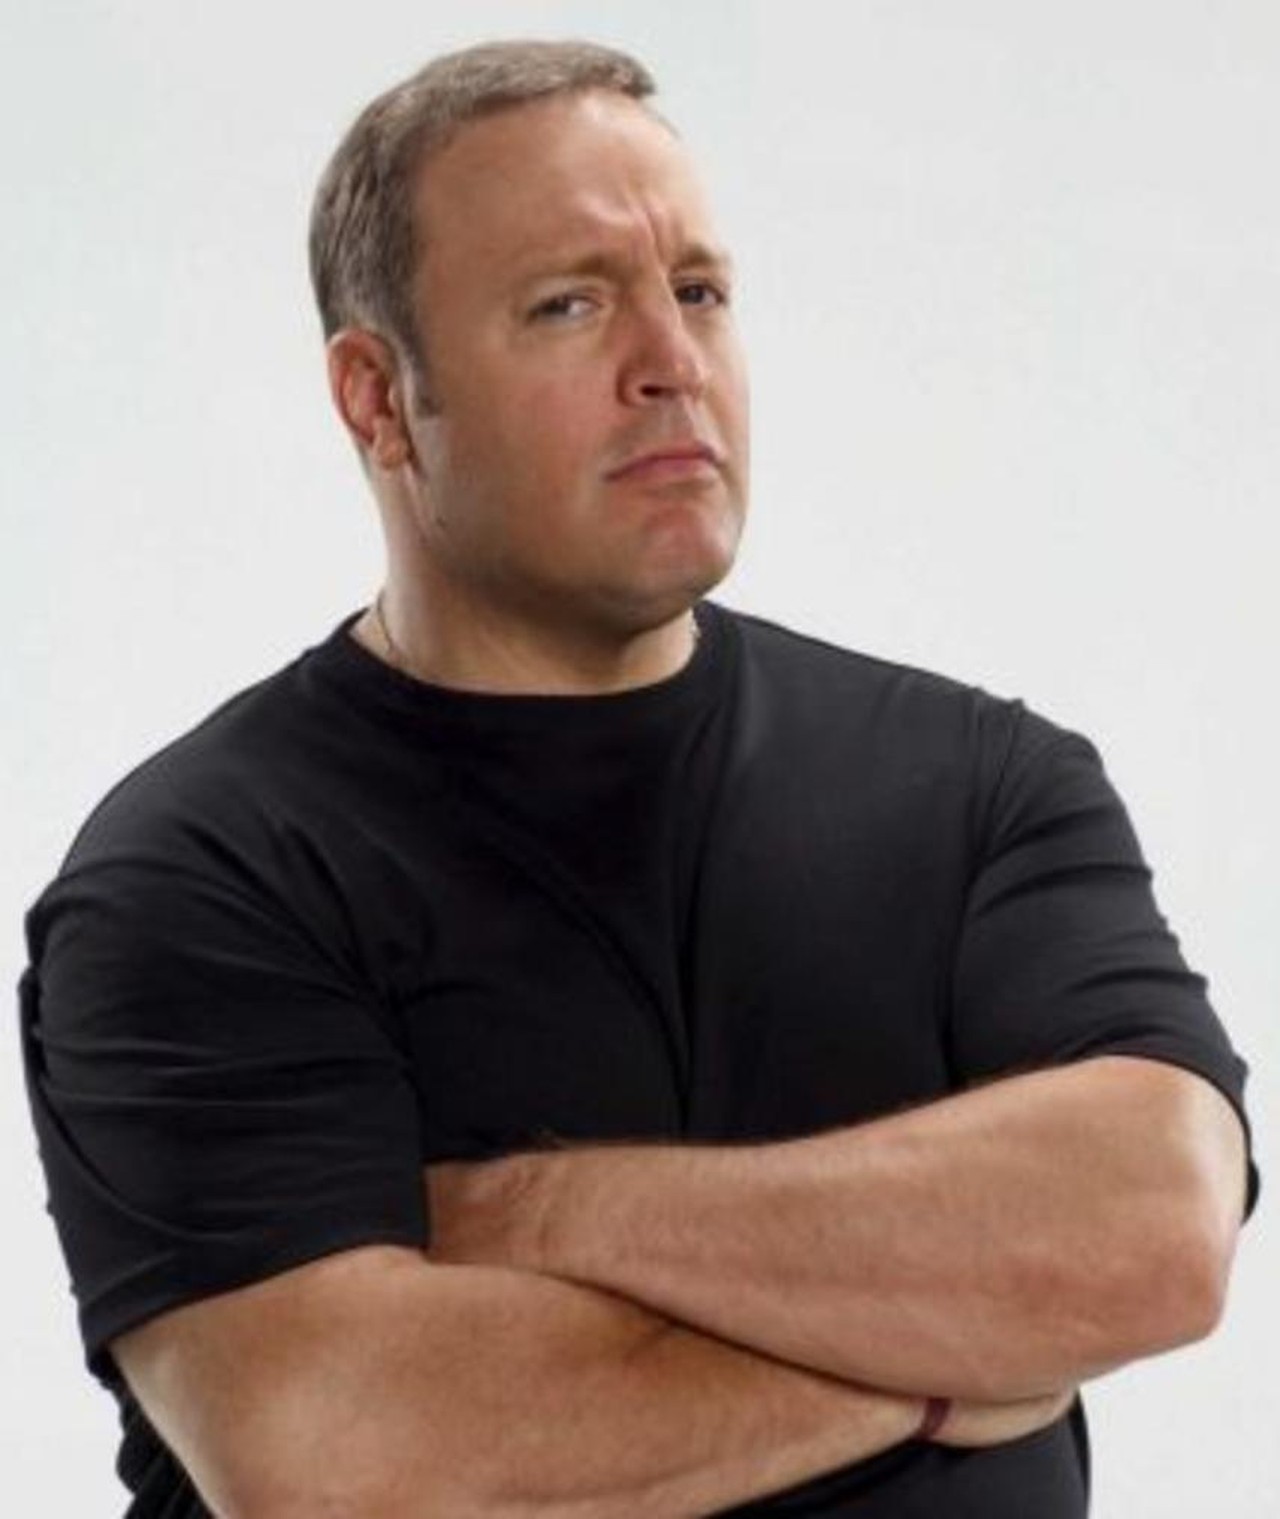 kevin james the crew